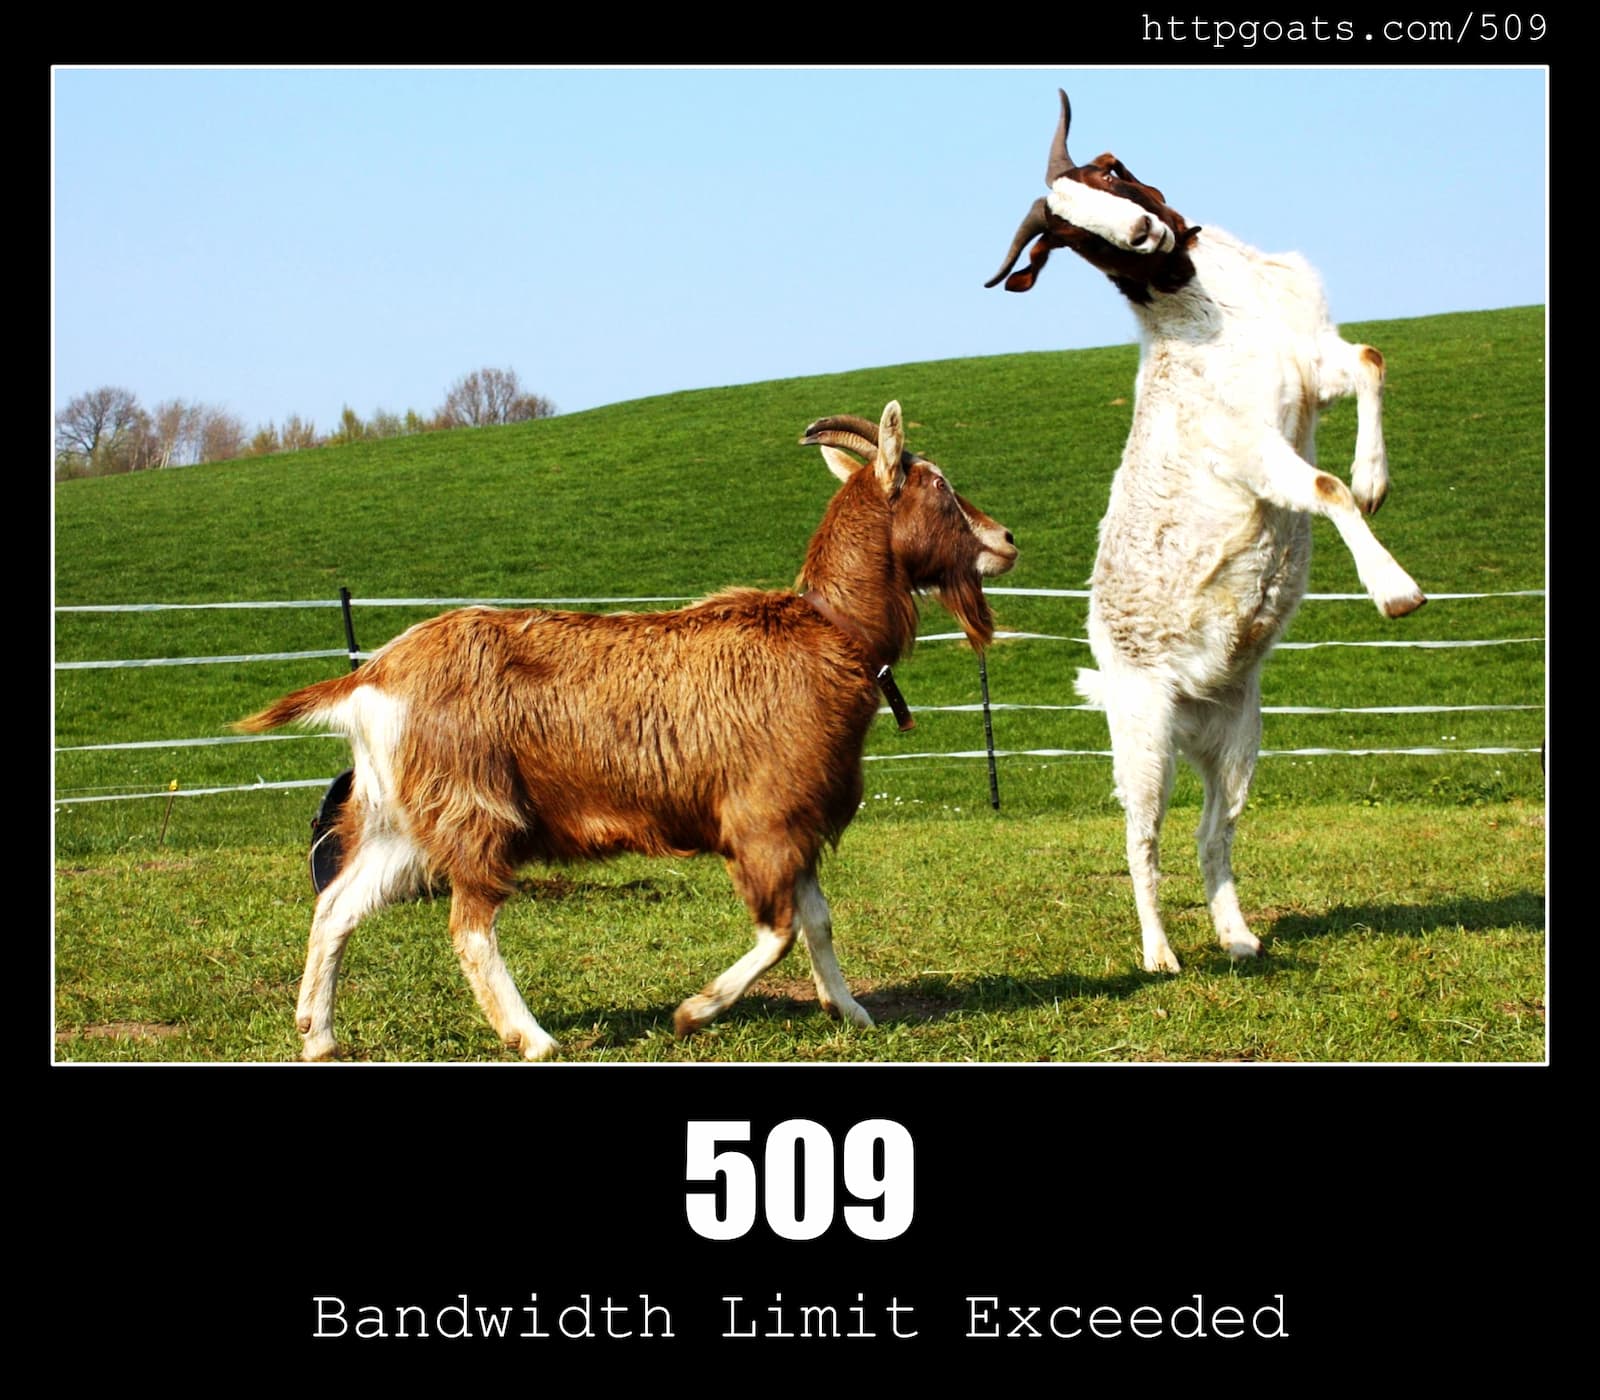 HTTP Status Code 509 Bandwidth Limit Exceeded & Goats